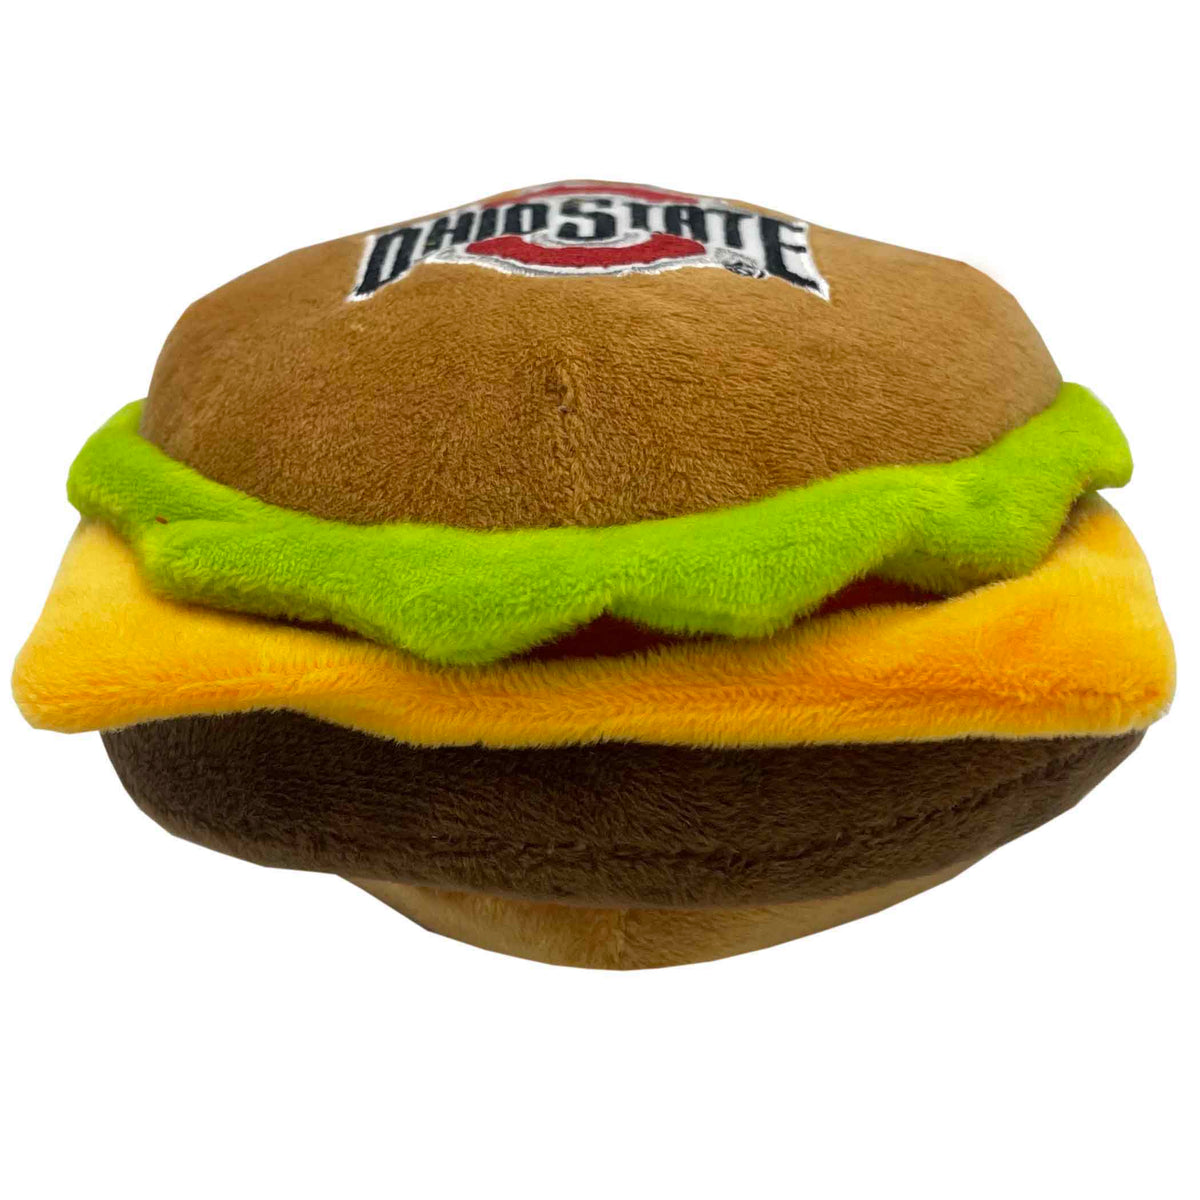 OH State Buckeyes Hamburger Plush Toys - 3 Red Rovers